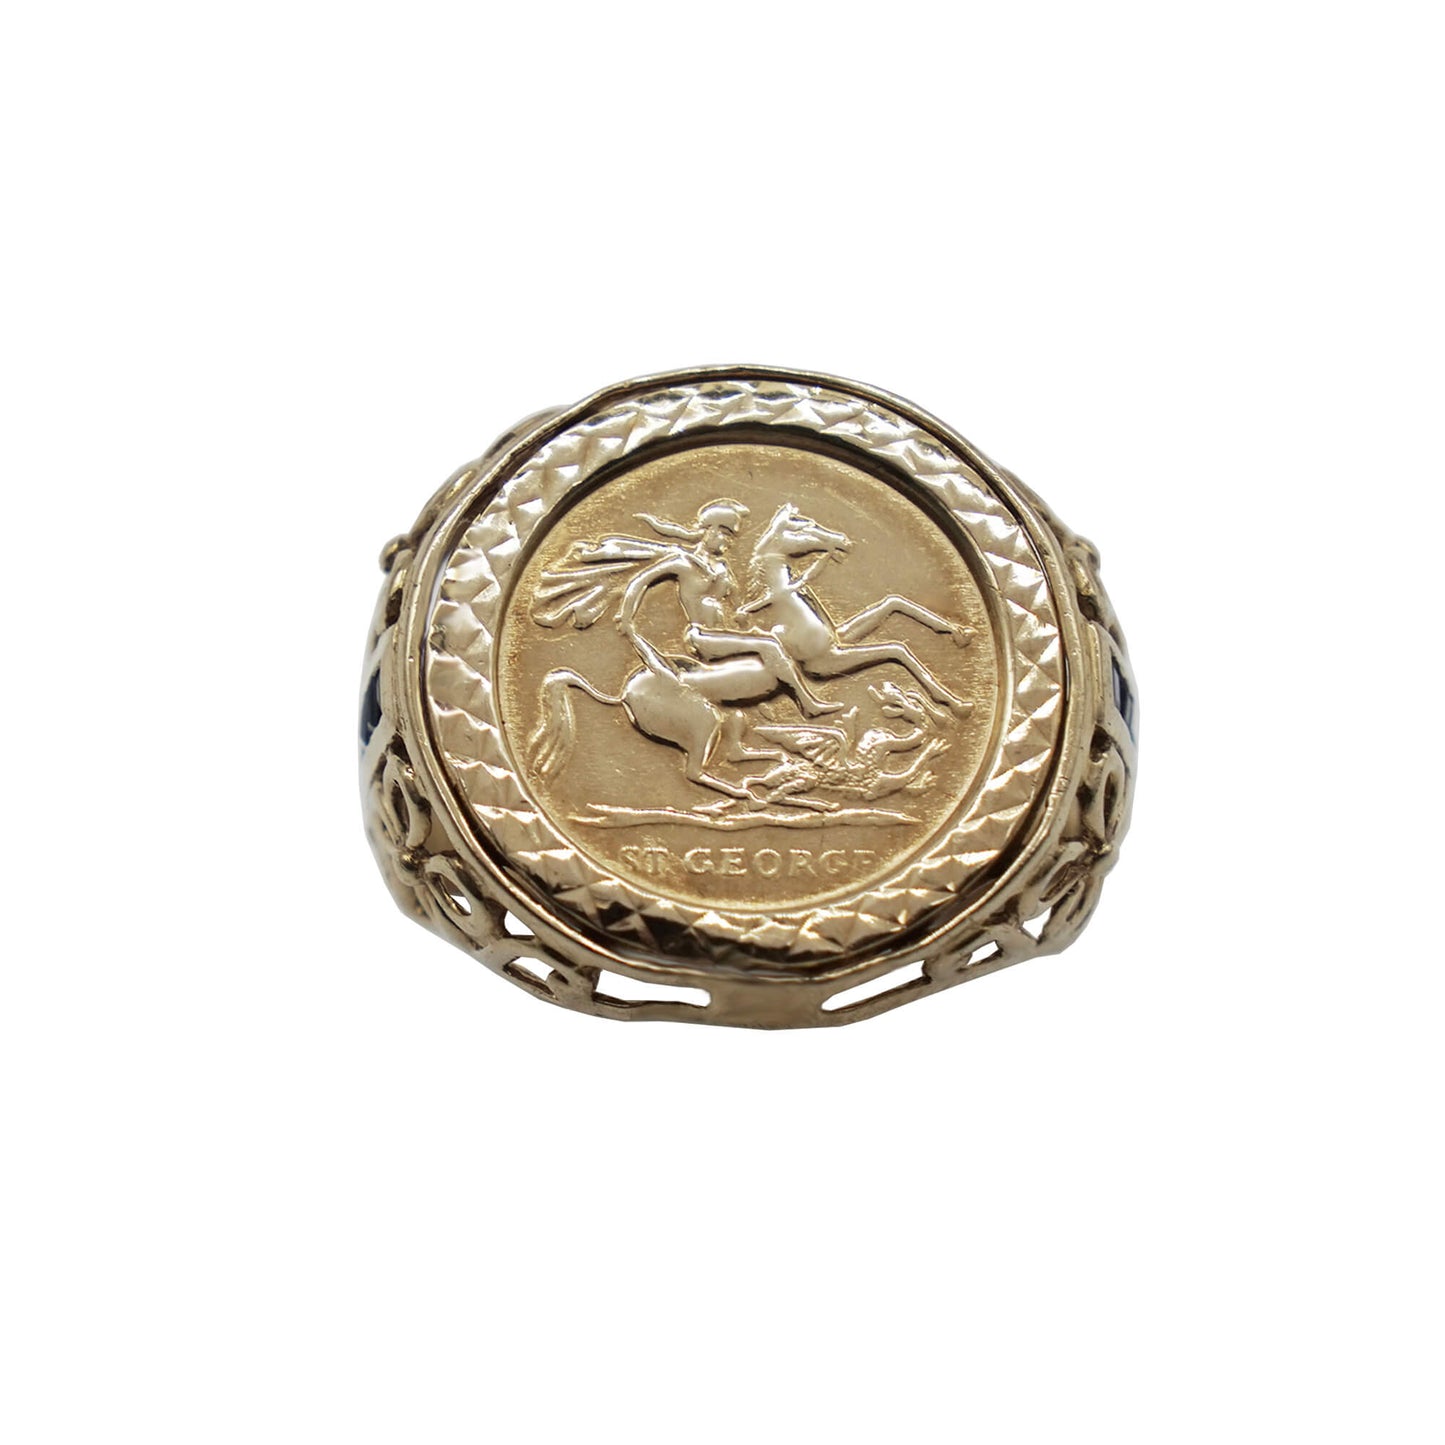 9K gold sovereign ring with stone set shank.